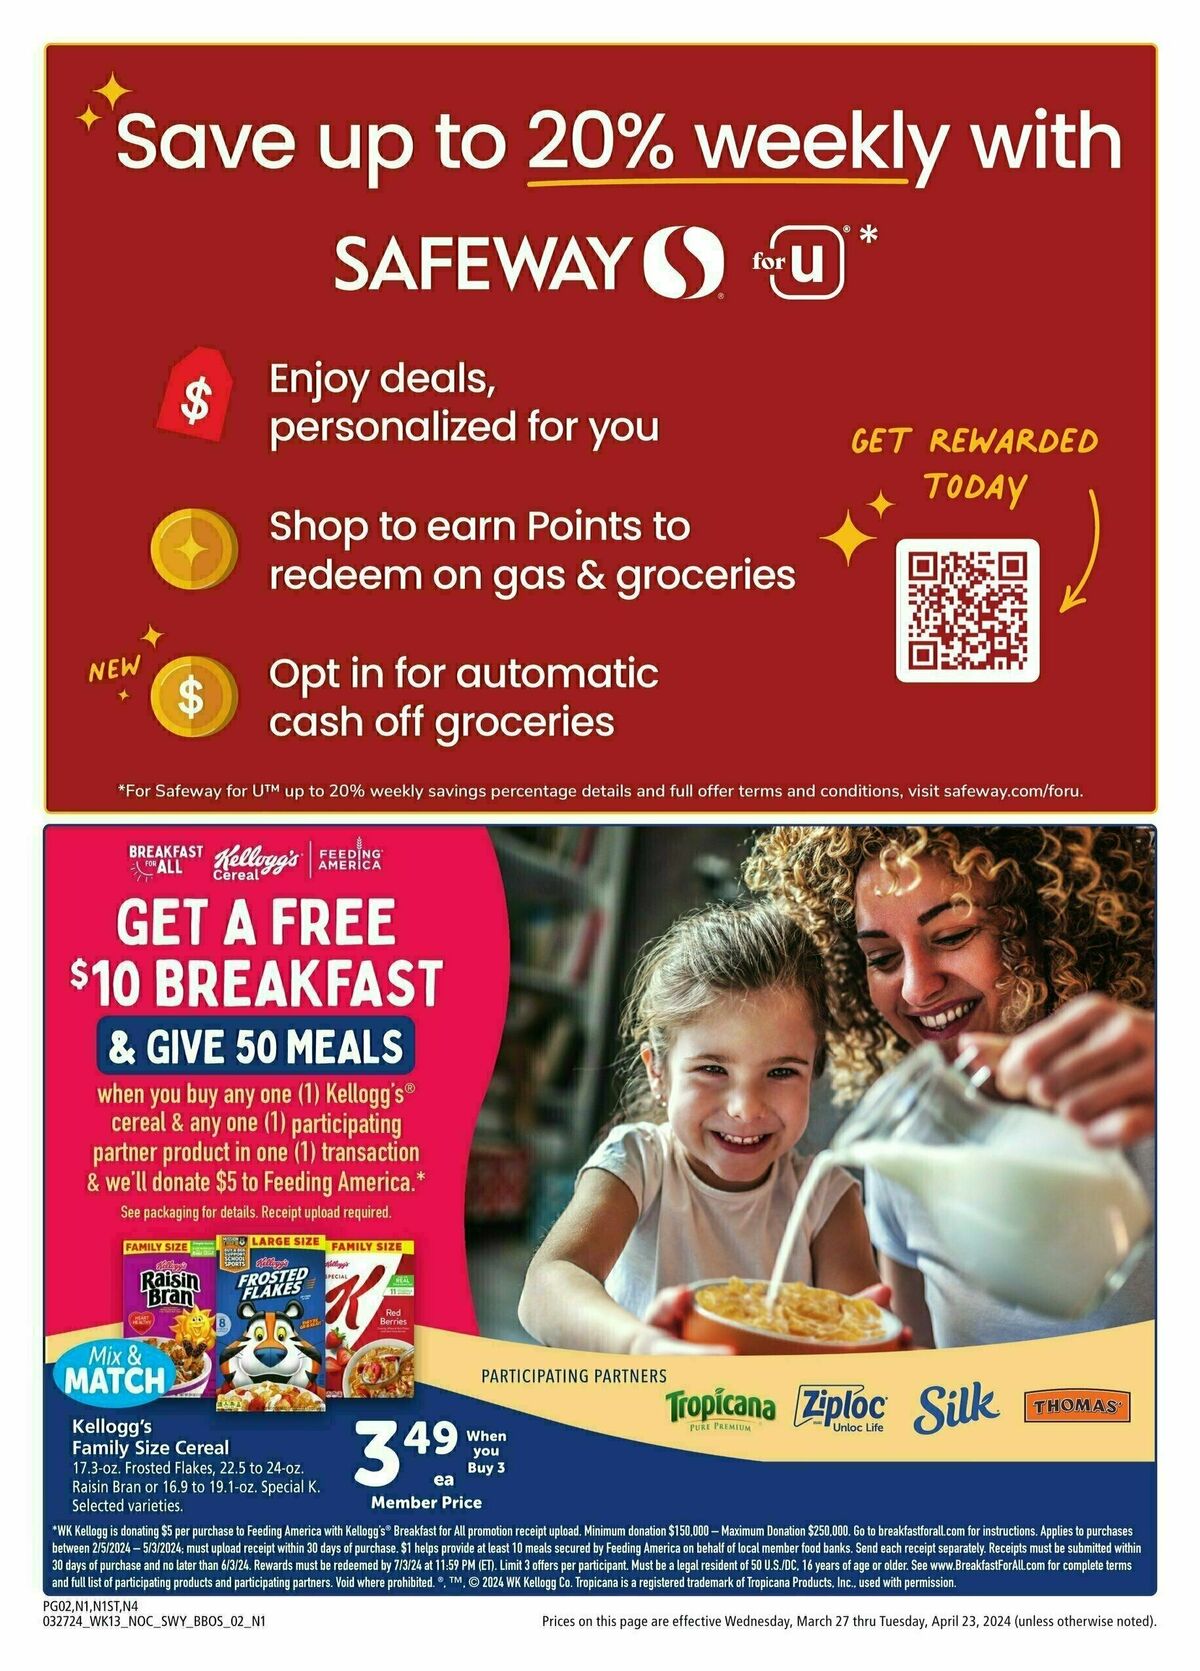 Safeway Big Book of Savings Weekly Ad from March 27